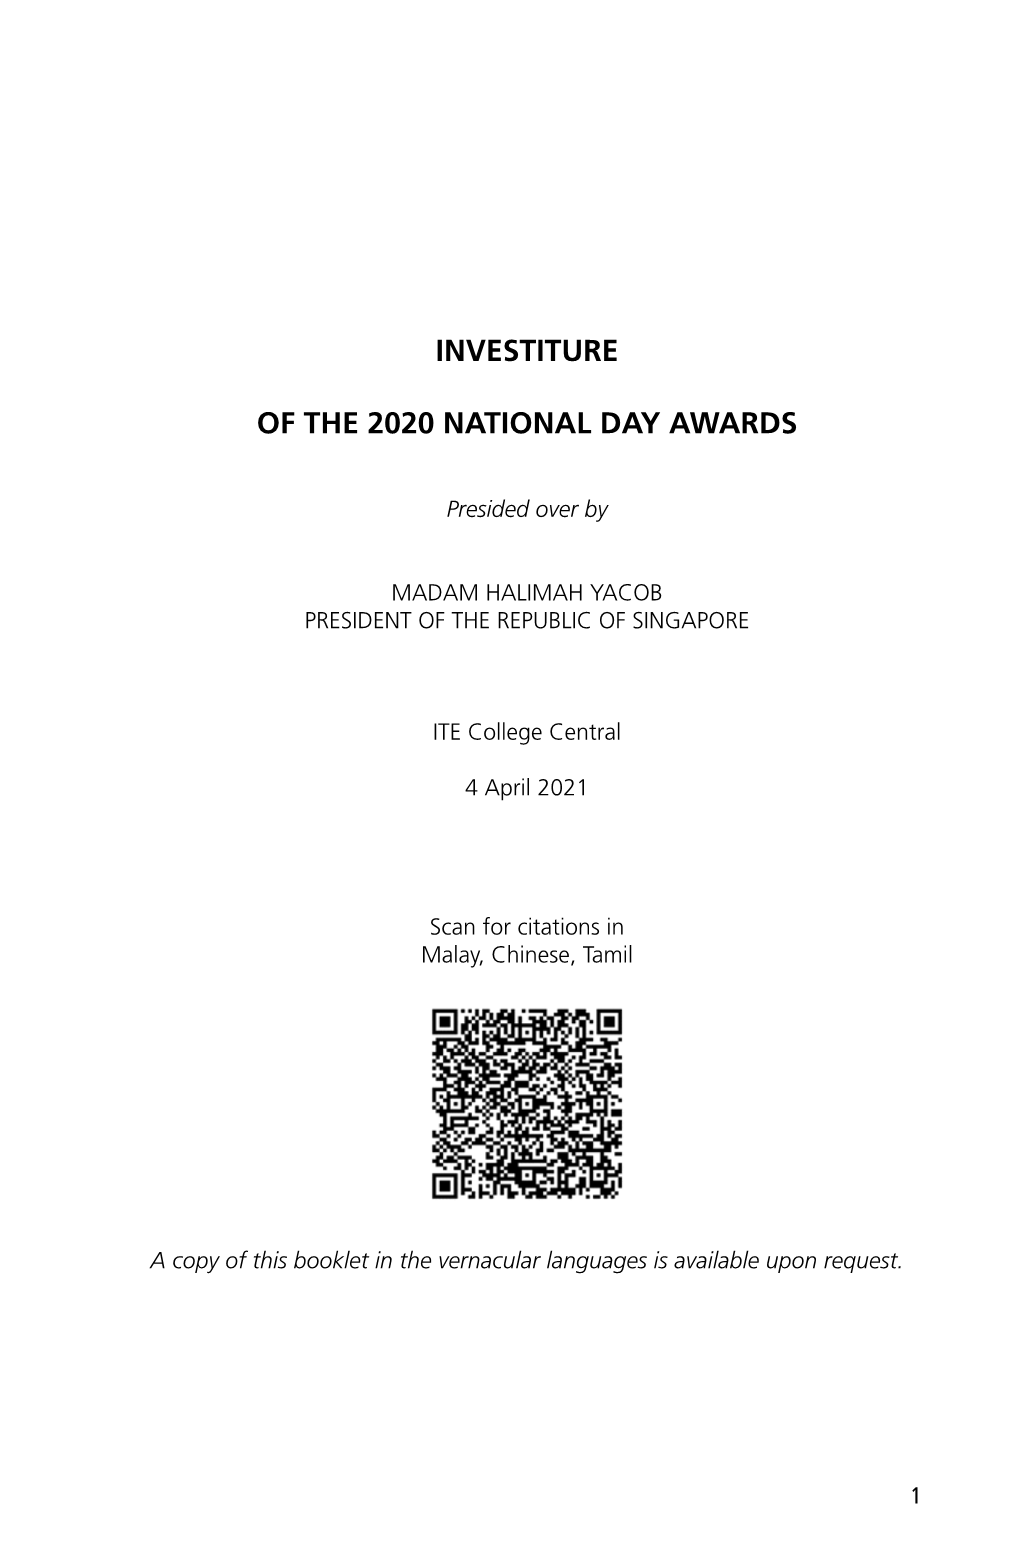 Investiture of the 2020 National Day Awards